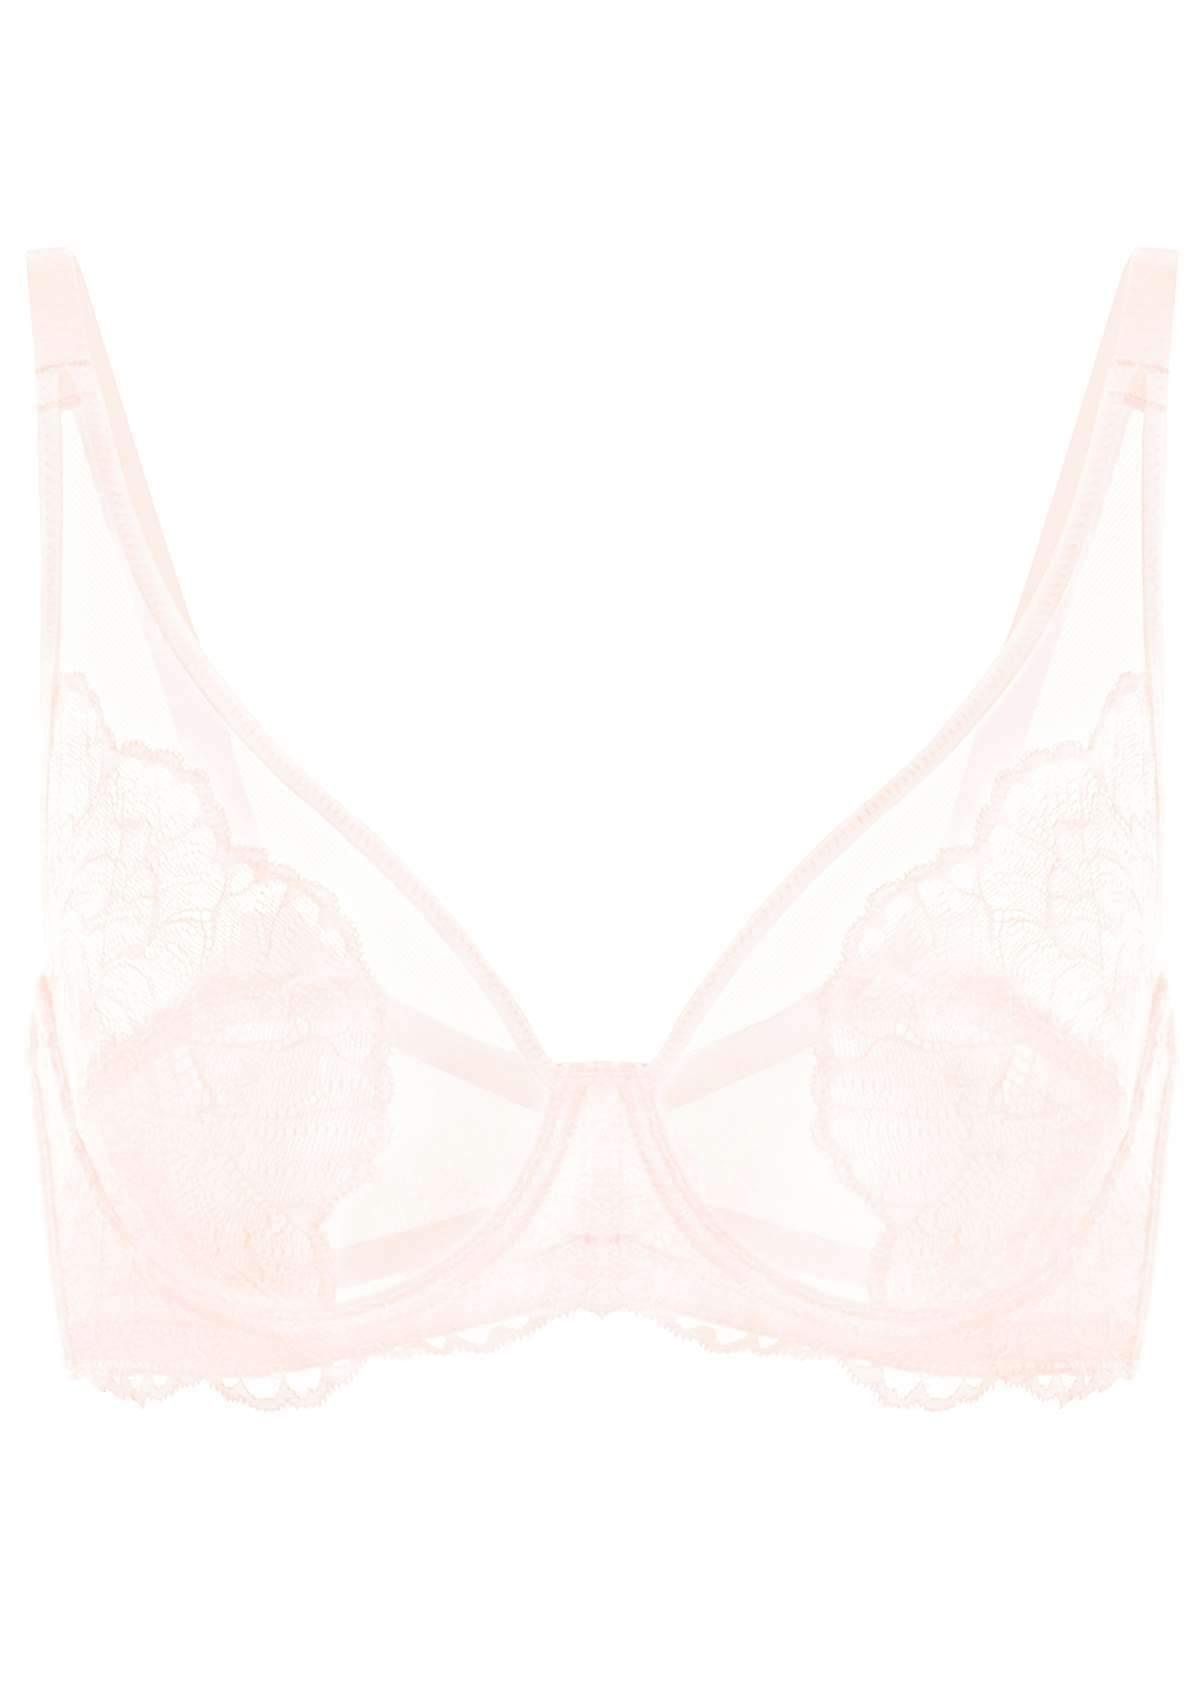 HSIA Blossom Sheer Lace Bra: Comfortable Underwire Bra For Big Busts - Dusty Peach / 42 / D